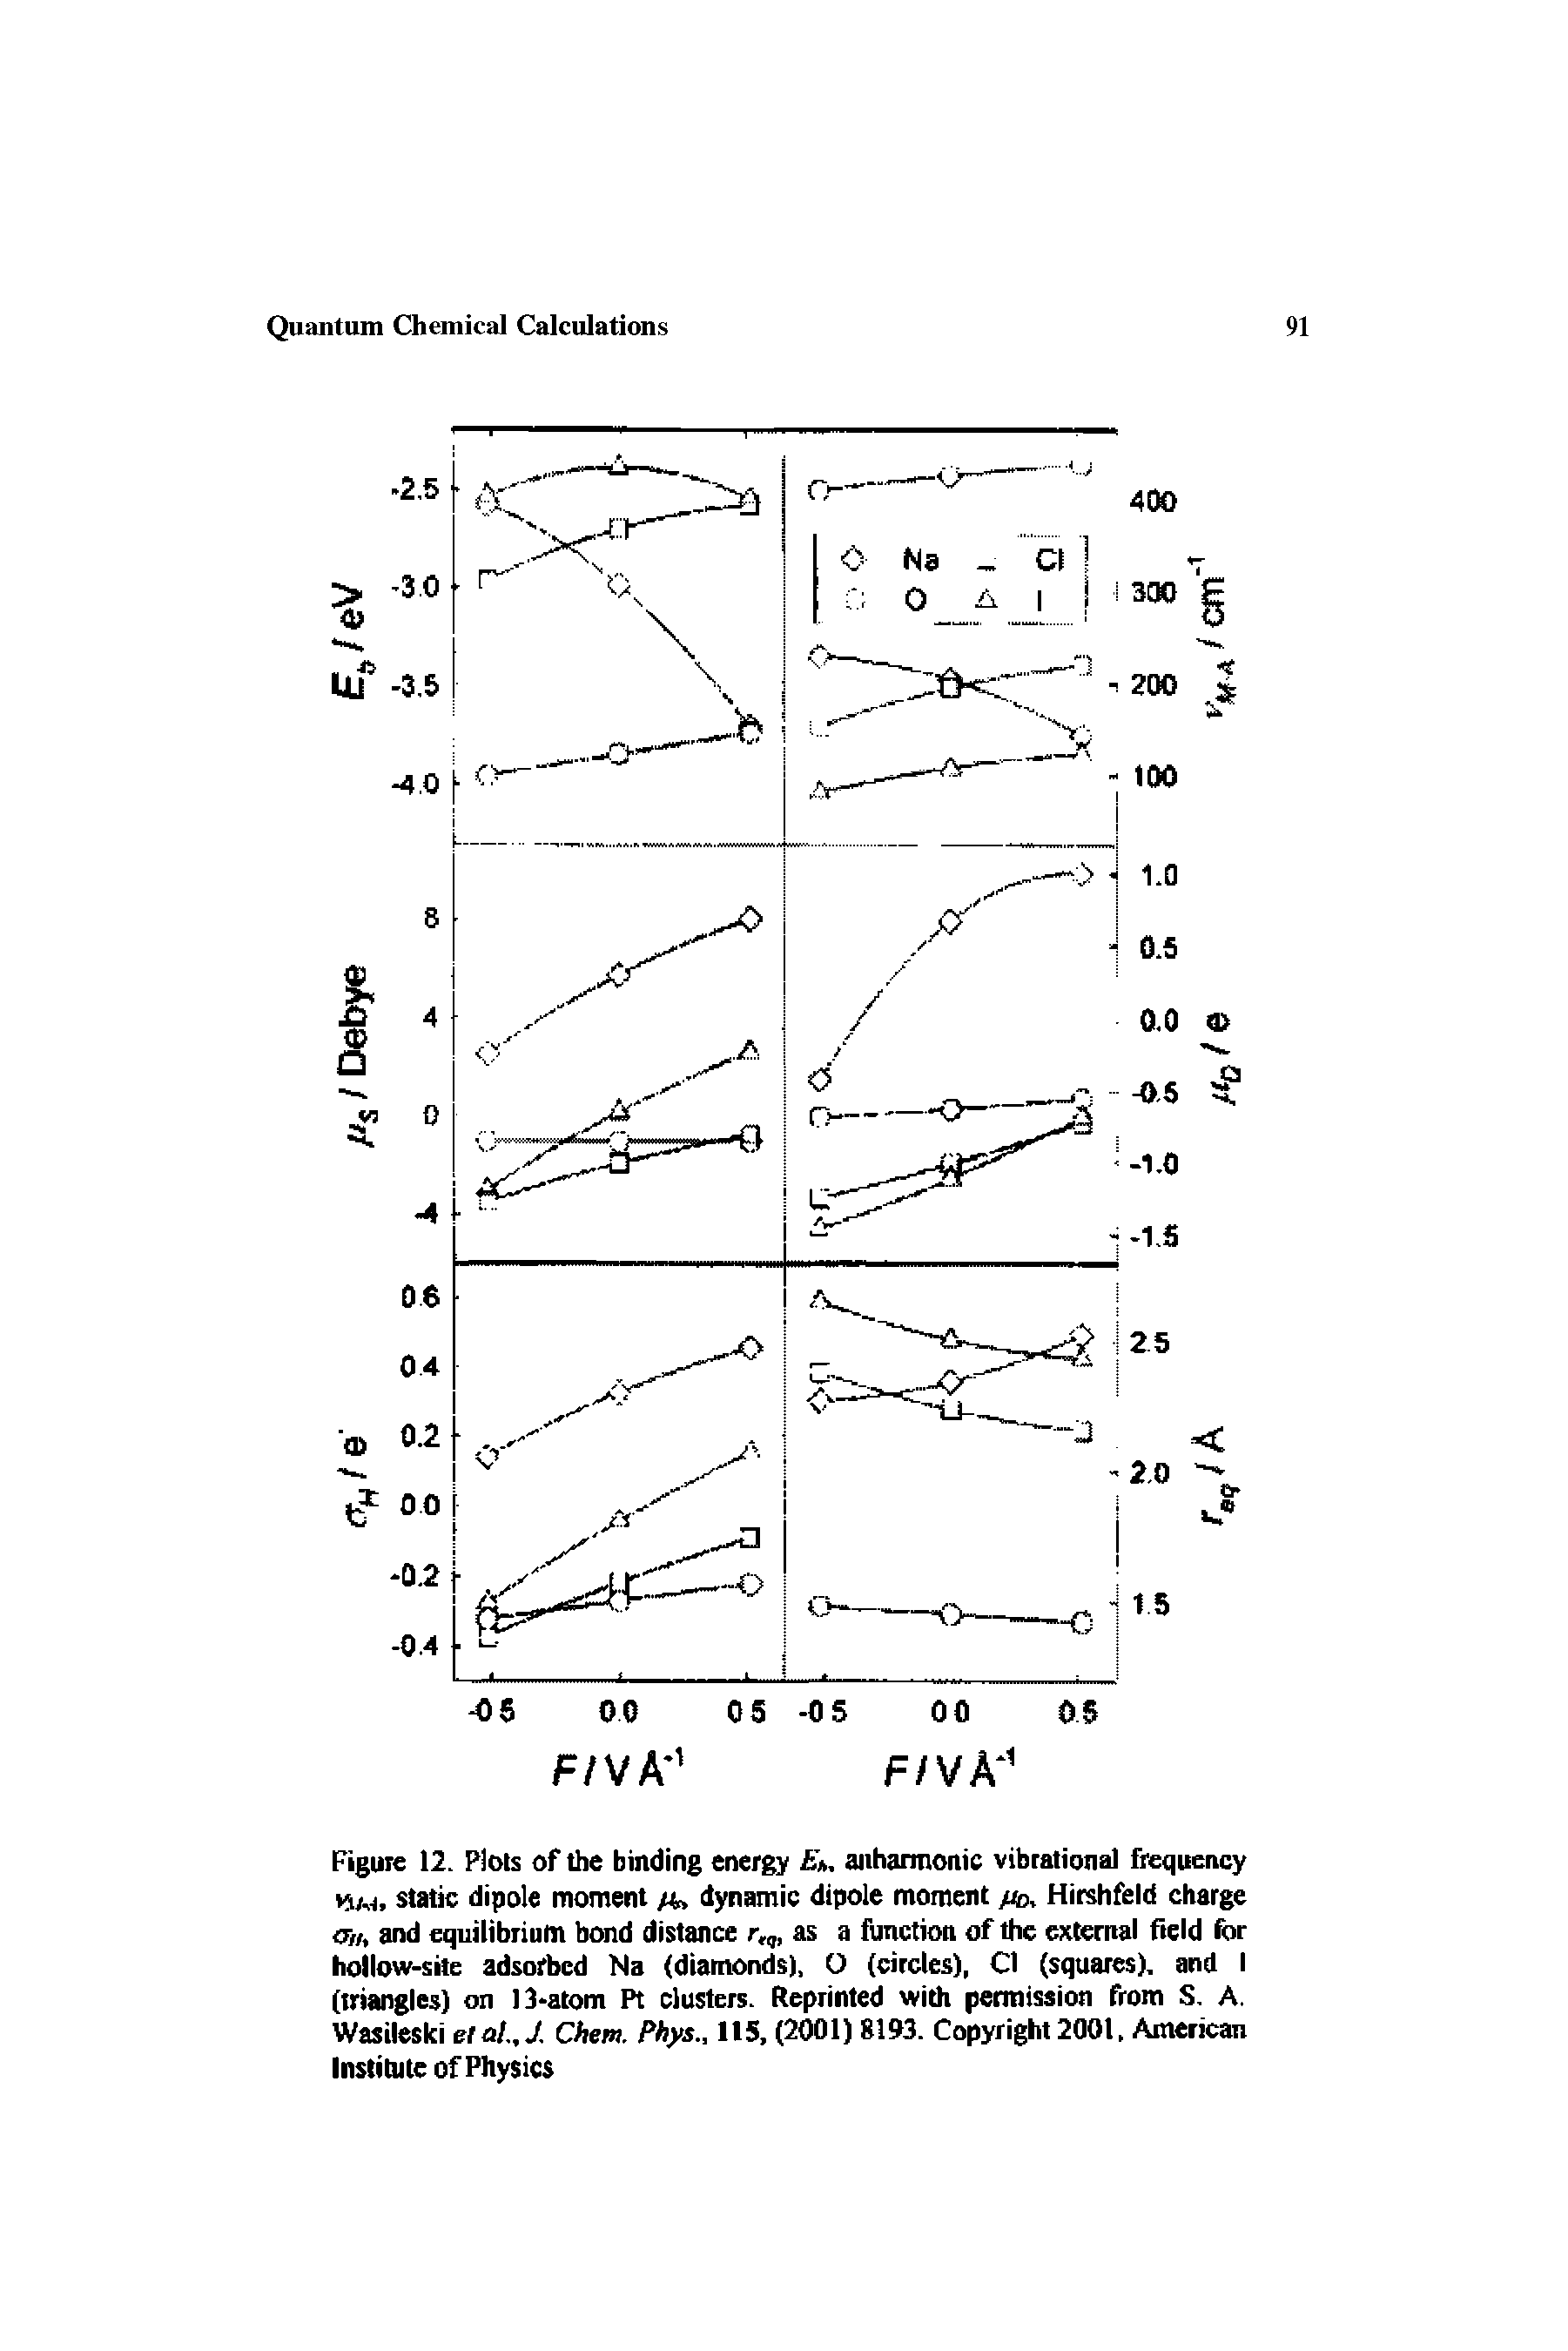 Figure 12. Plots of the binding energy ) . anharmonic vibrational fiequency static dipole moment dynamic dipole moment /to, Hitshfeld charge <T//, and equilibrium bold distance as a lunctioa of the external field fiir hollow-stie adsorbed Na (diamonds), O (circles), Cl (squares), and I (triangles) on l3>atom Pt clusters. Reprinted with permission from S. A. Wasileski eial.,J. Chem. Phys., 115, (2001) 8193. Copyright 2001, American Institute of Physics...